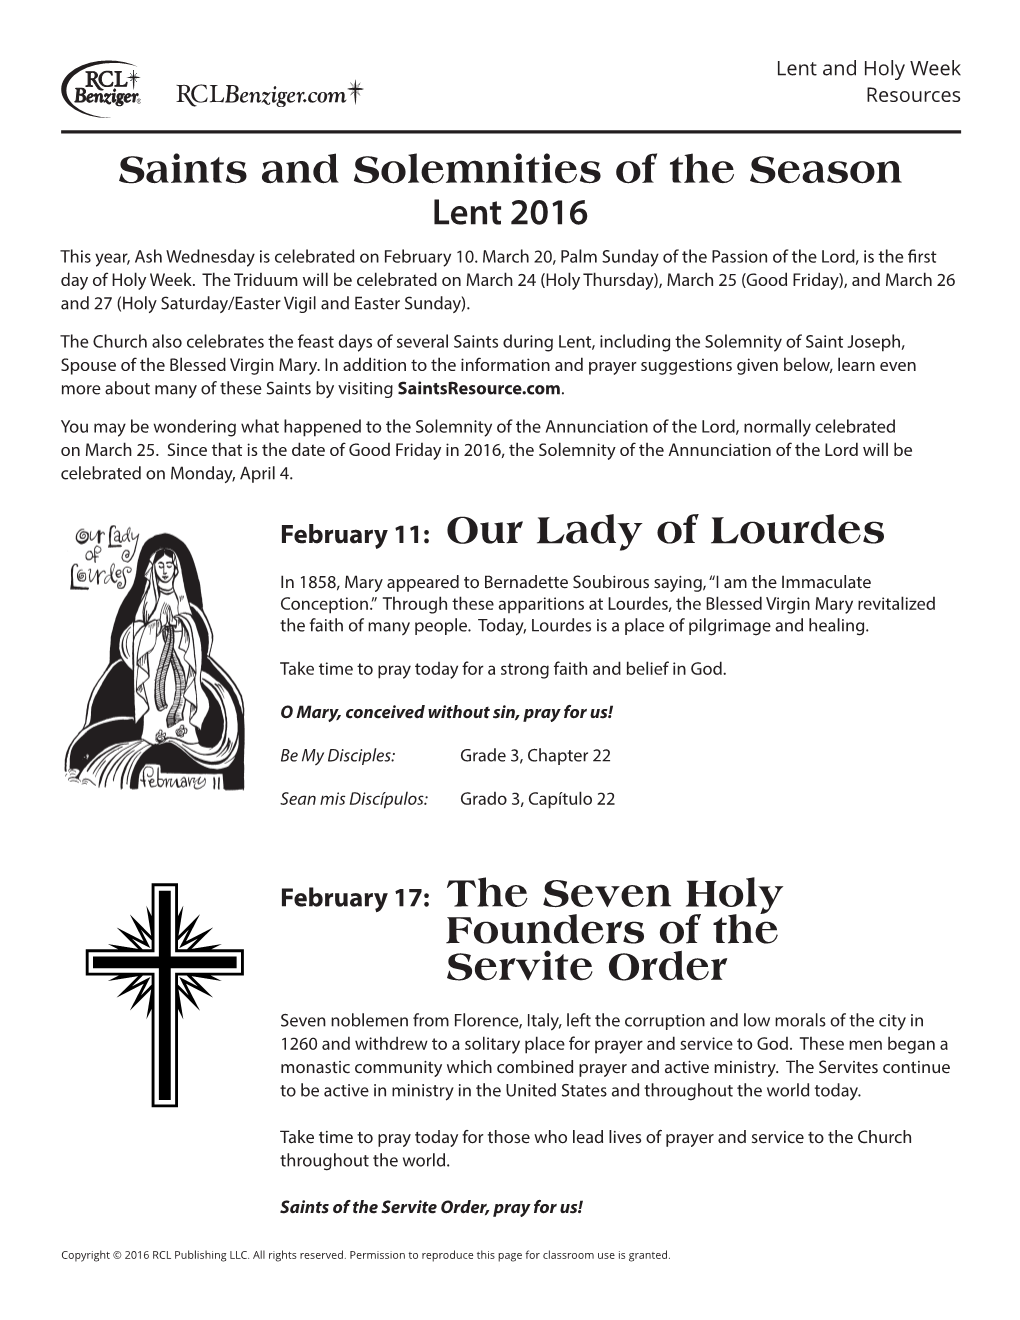 February 11: Our Lady of Lourdes Founders of the Servite Order